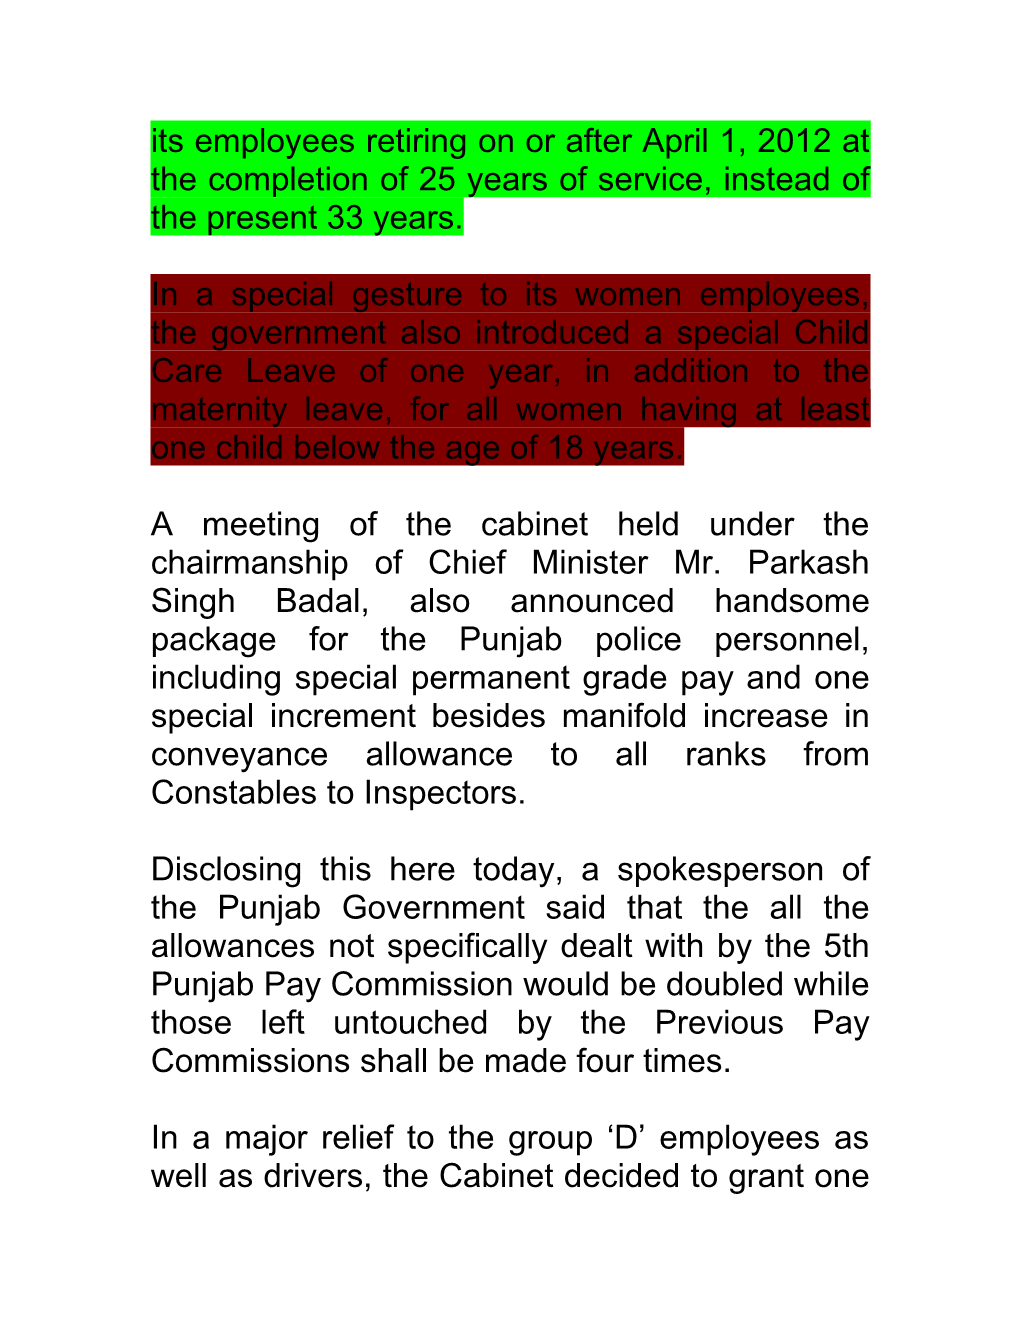 Punjab Cabinet Revives ACP Scheme, One Year Special Leave for Women Employees, Adhoc Staff